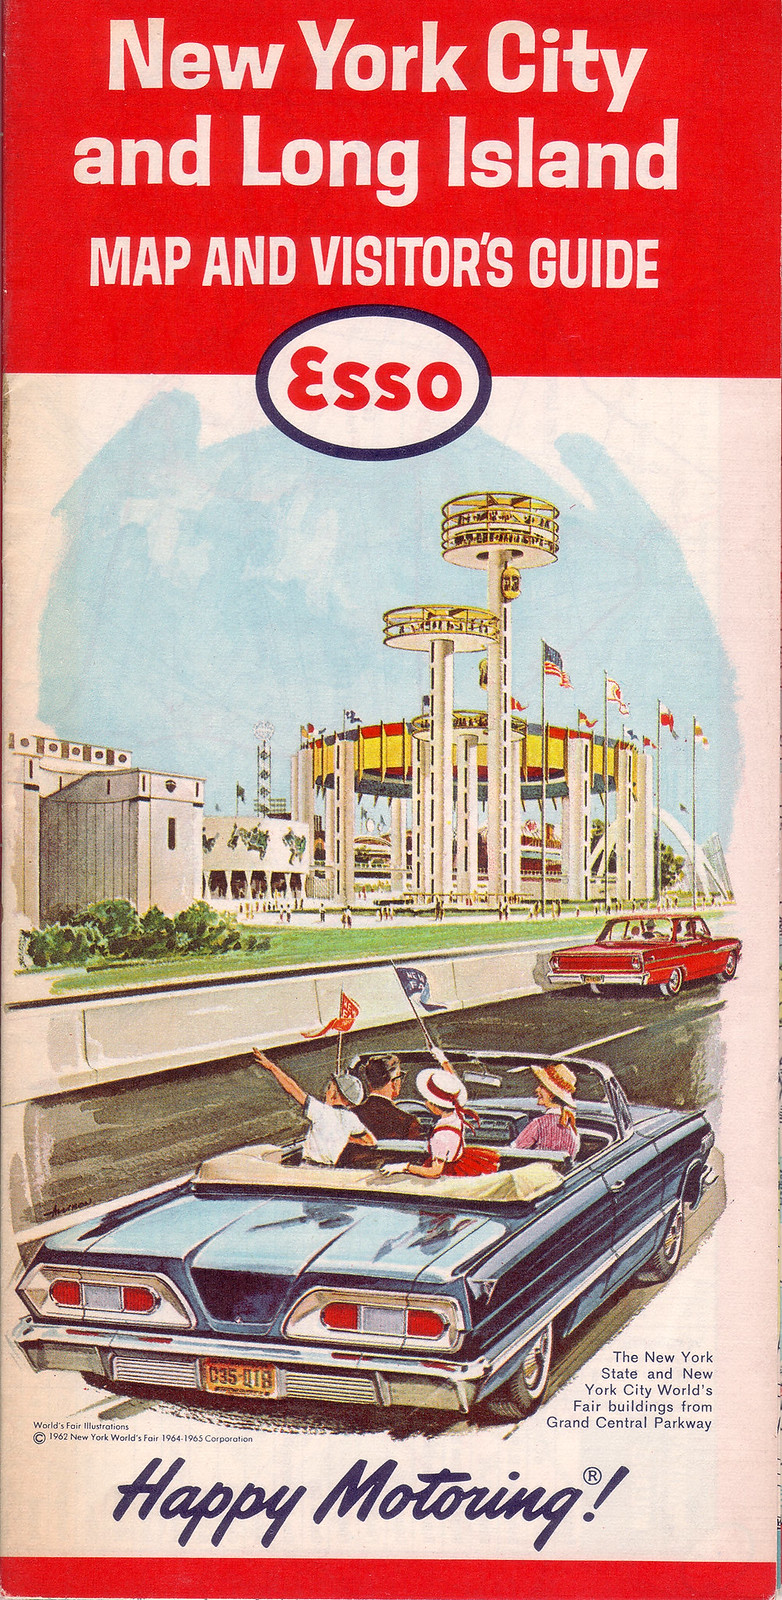 Esso New York City and Long Island Map and Visitor's Guide - 1964